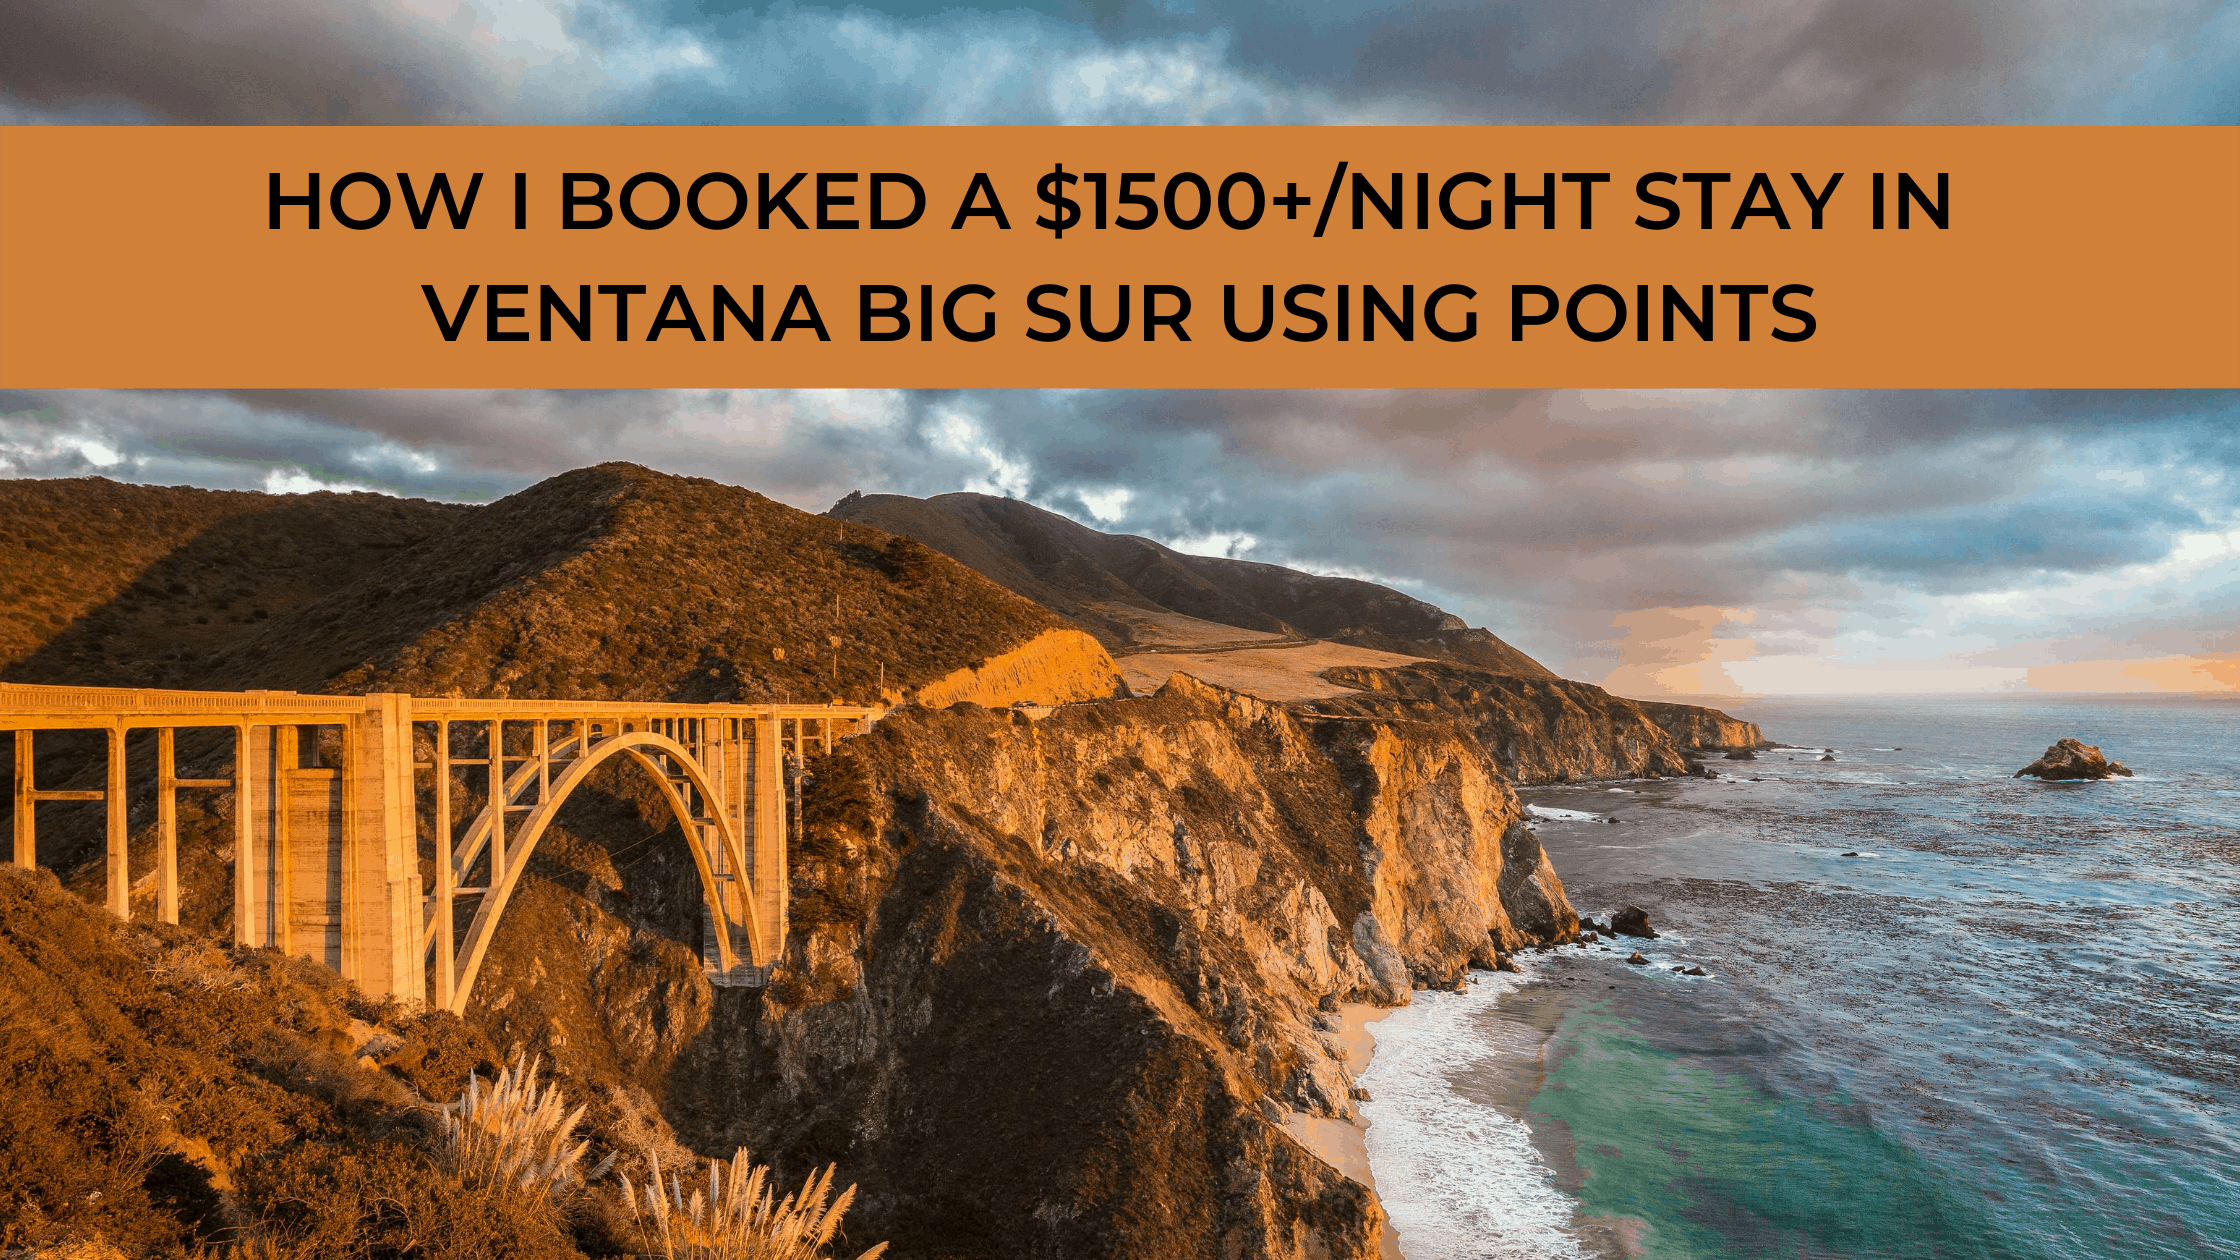 How To Book Ventana Big Sur Using World of Hyatt or Chase Points